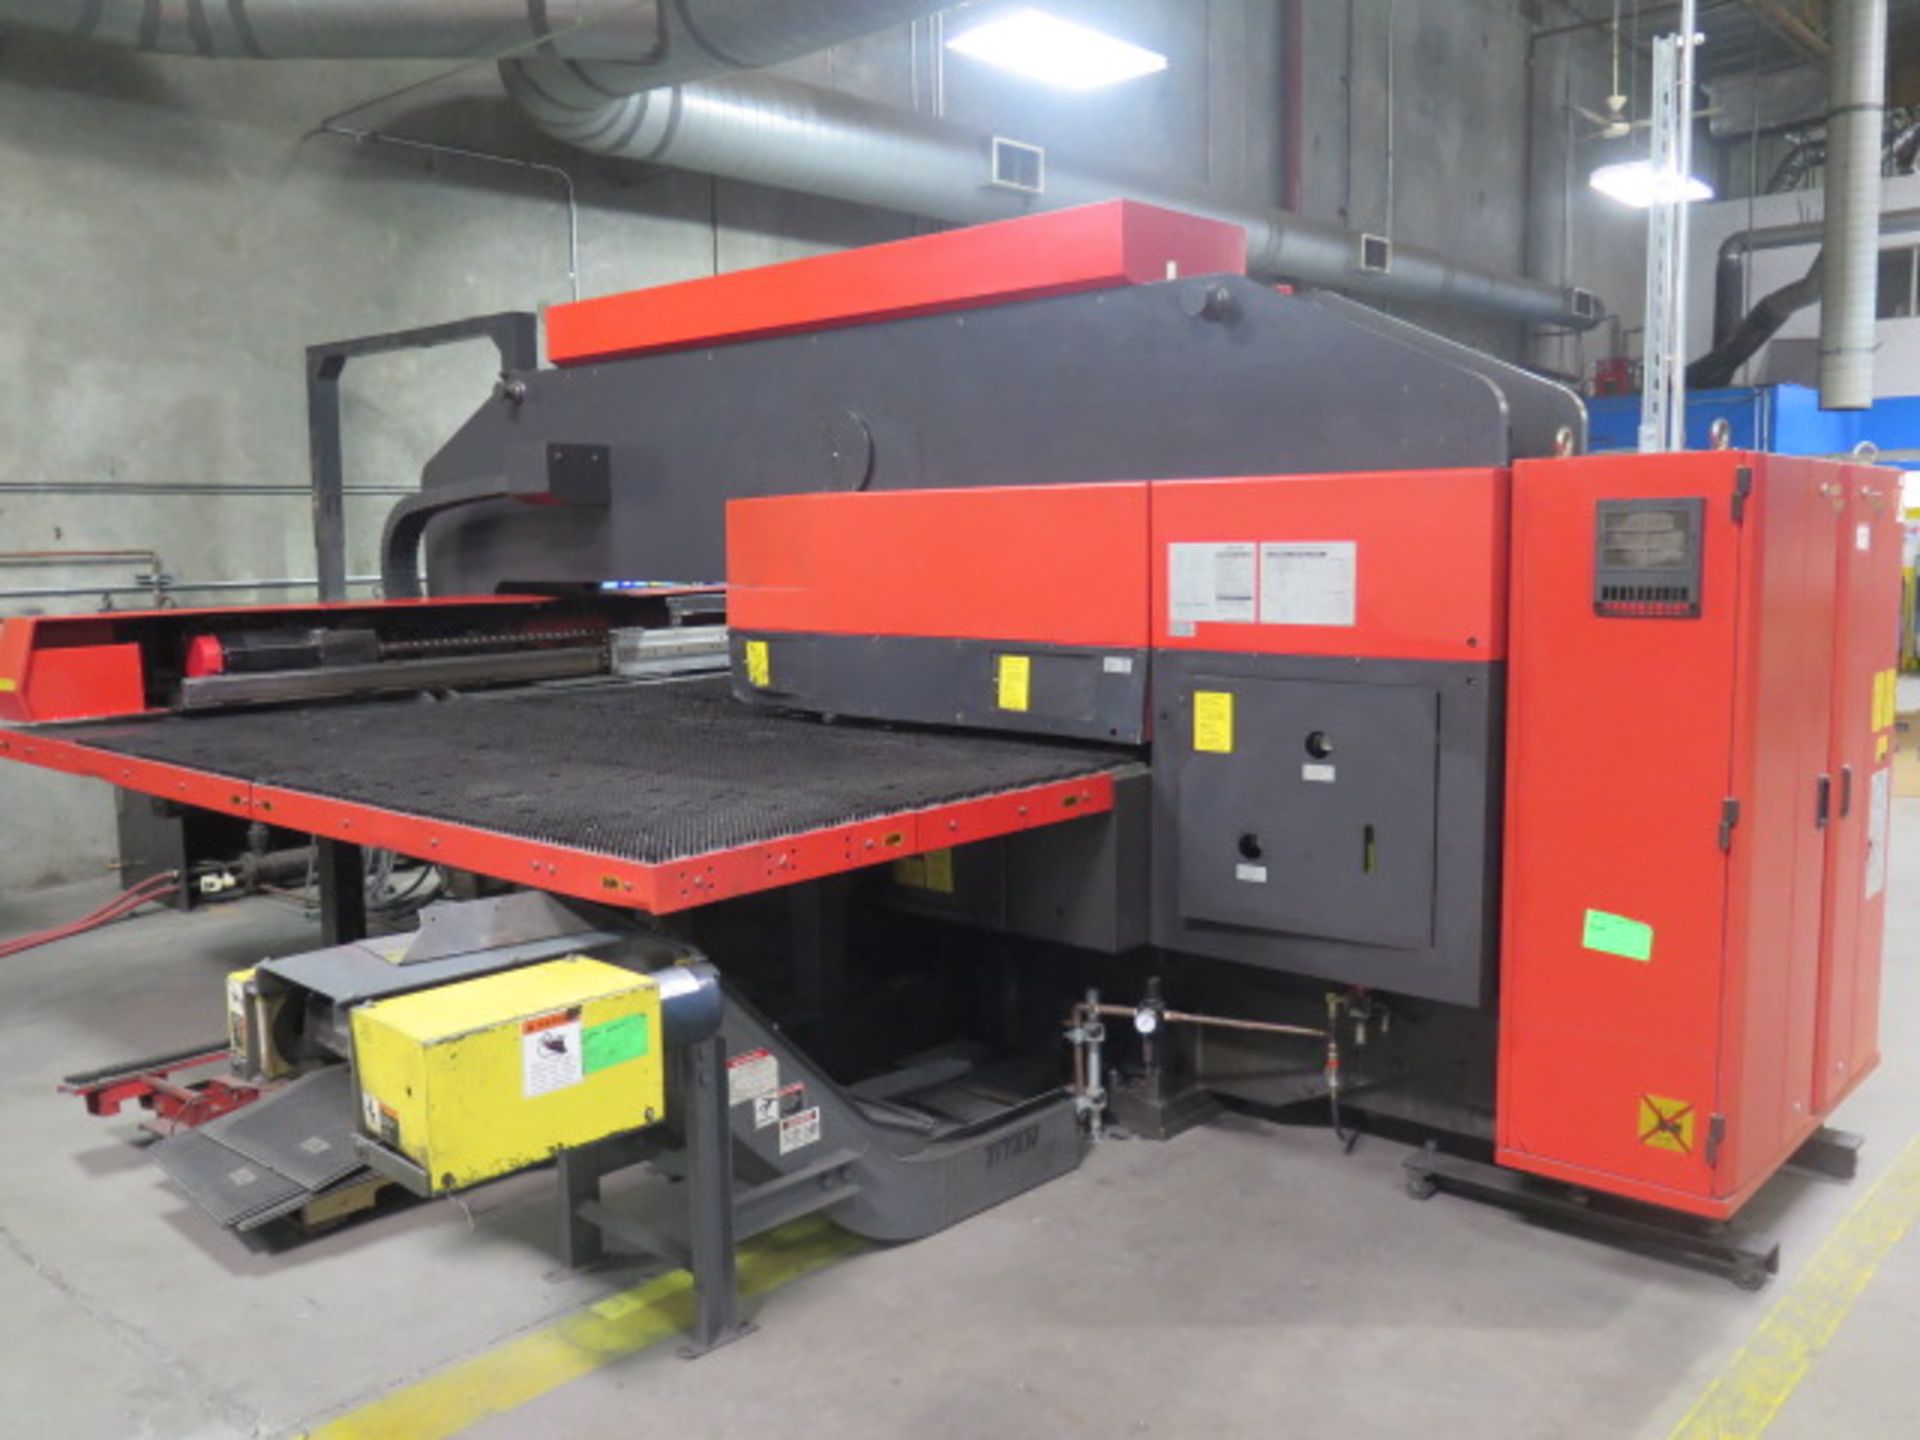 1998 Amada VIPROS 358 King 30 Ton 58-Station CNC Turret Punch Press s/n 35840011 (Recently Factory - Image 14 of 16